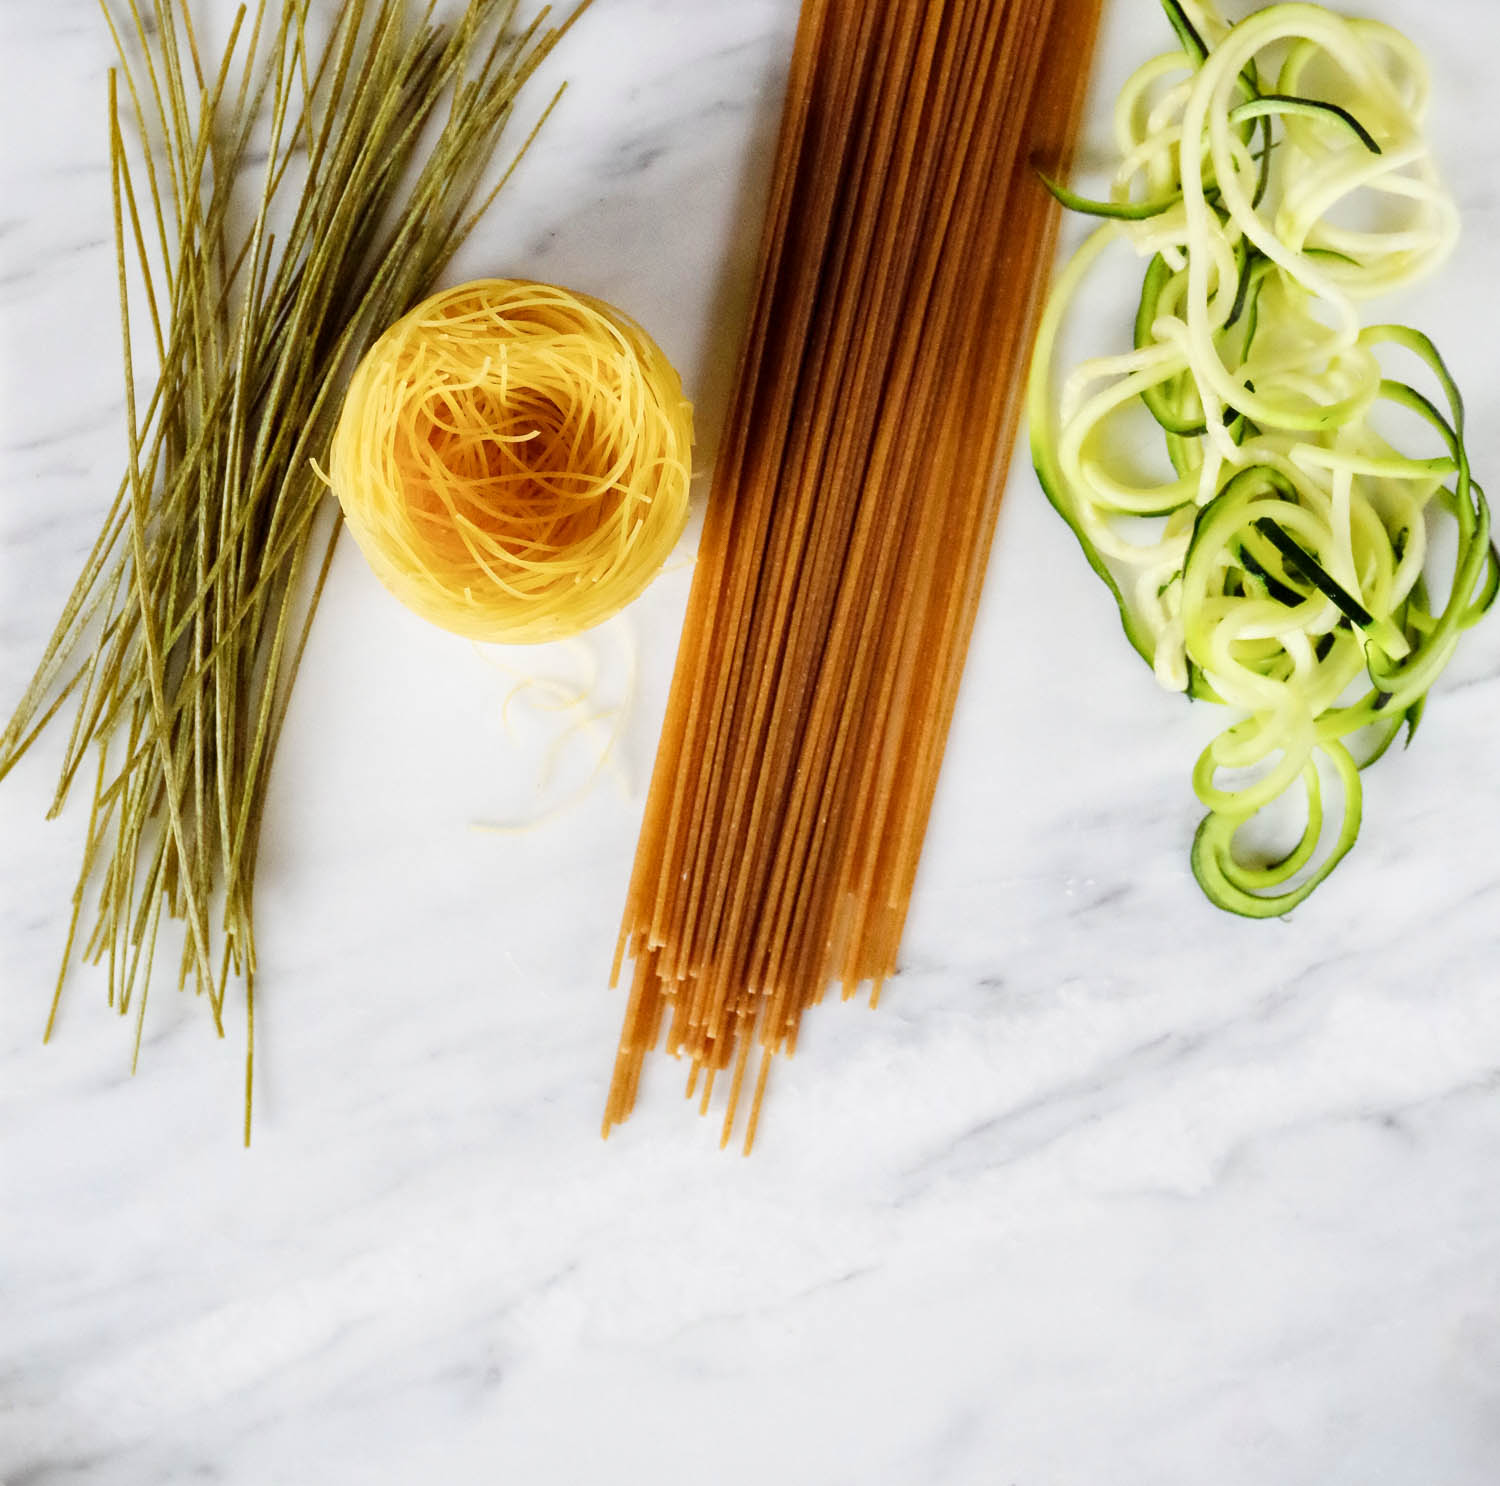 Noodle options: edamame, angel hair, whole wheat, and zucchini.